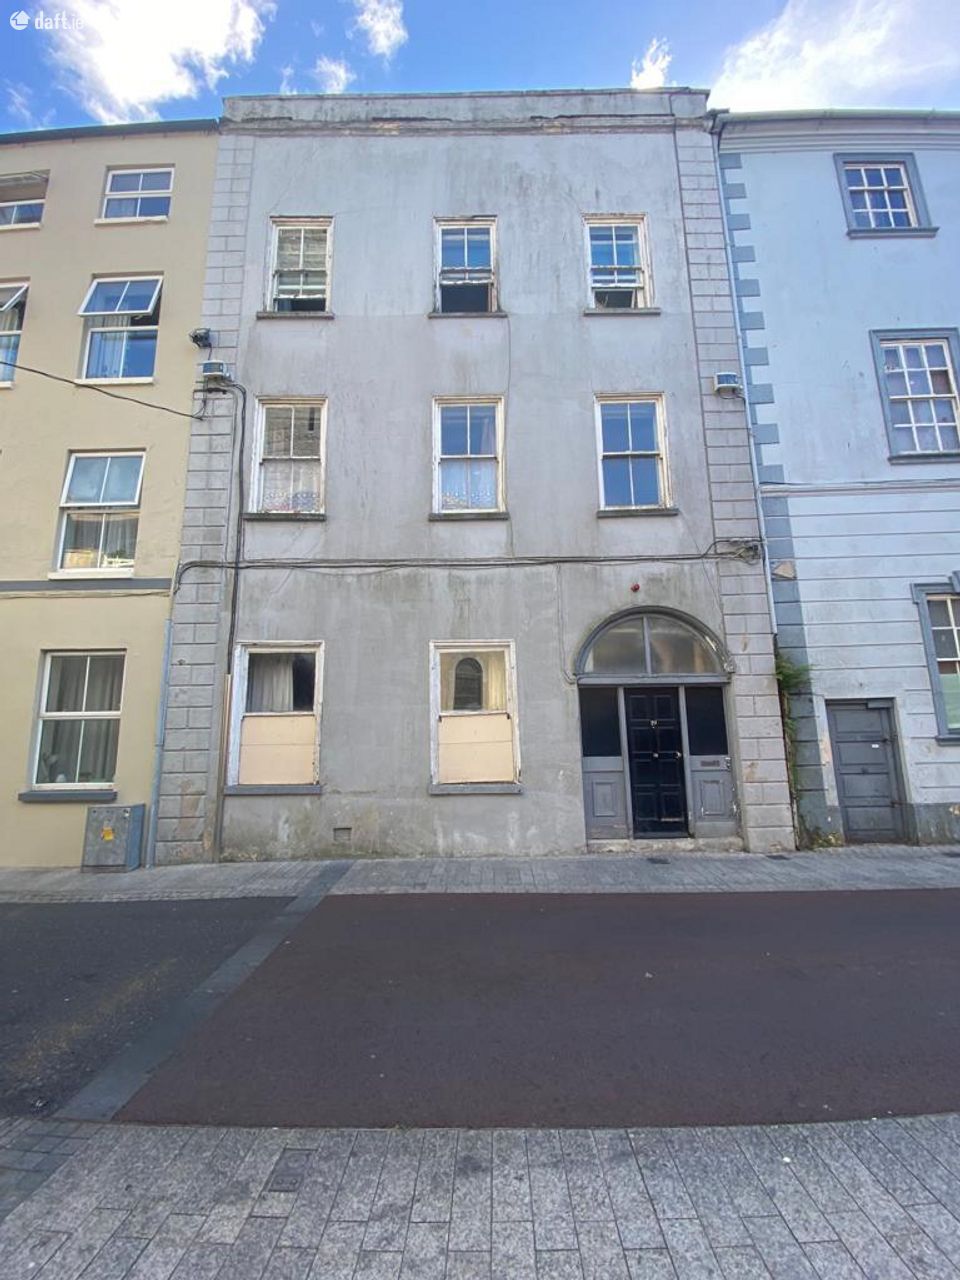 19 Lady Lane, Waterford City, Co. Waterford